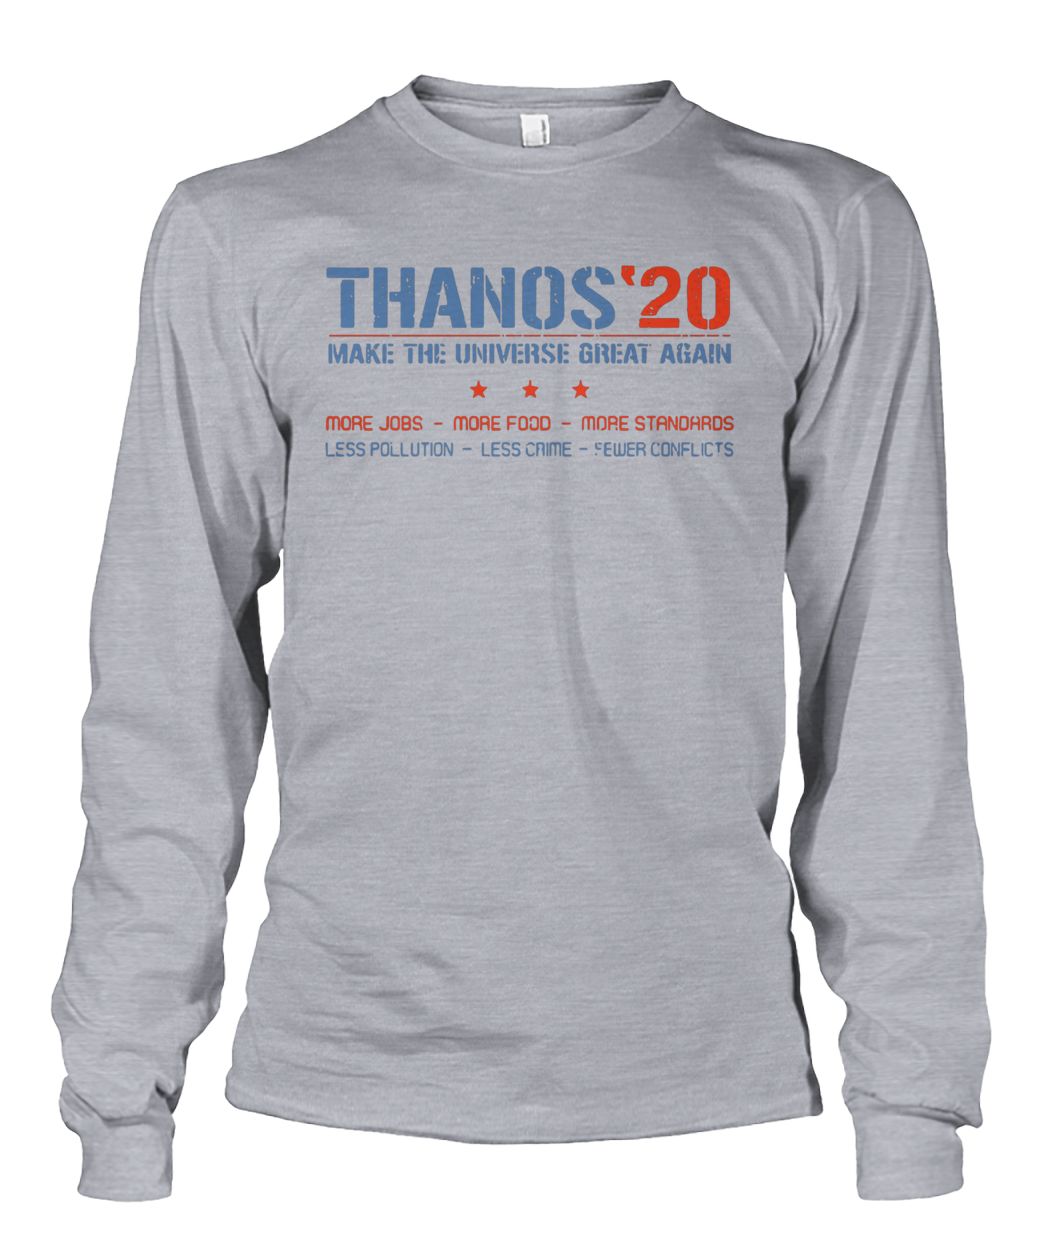 Thanos'20 make the universe great again more jobs more food more standards unisex long sleeve